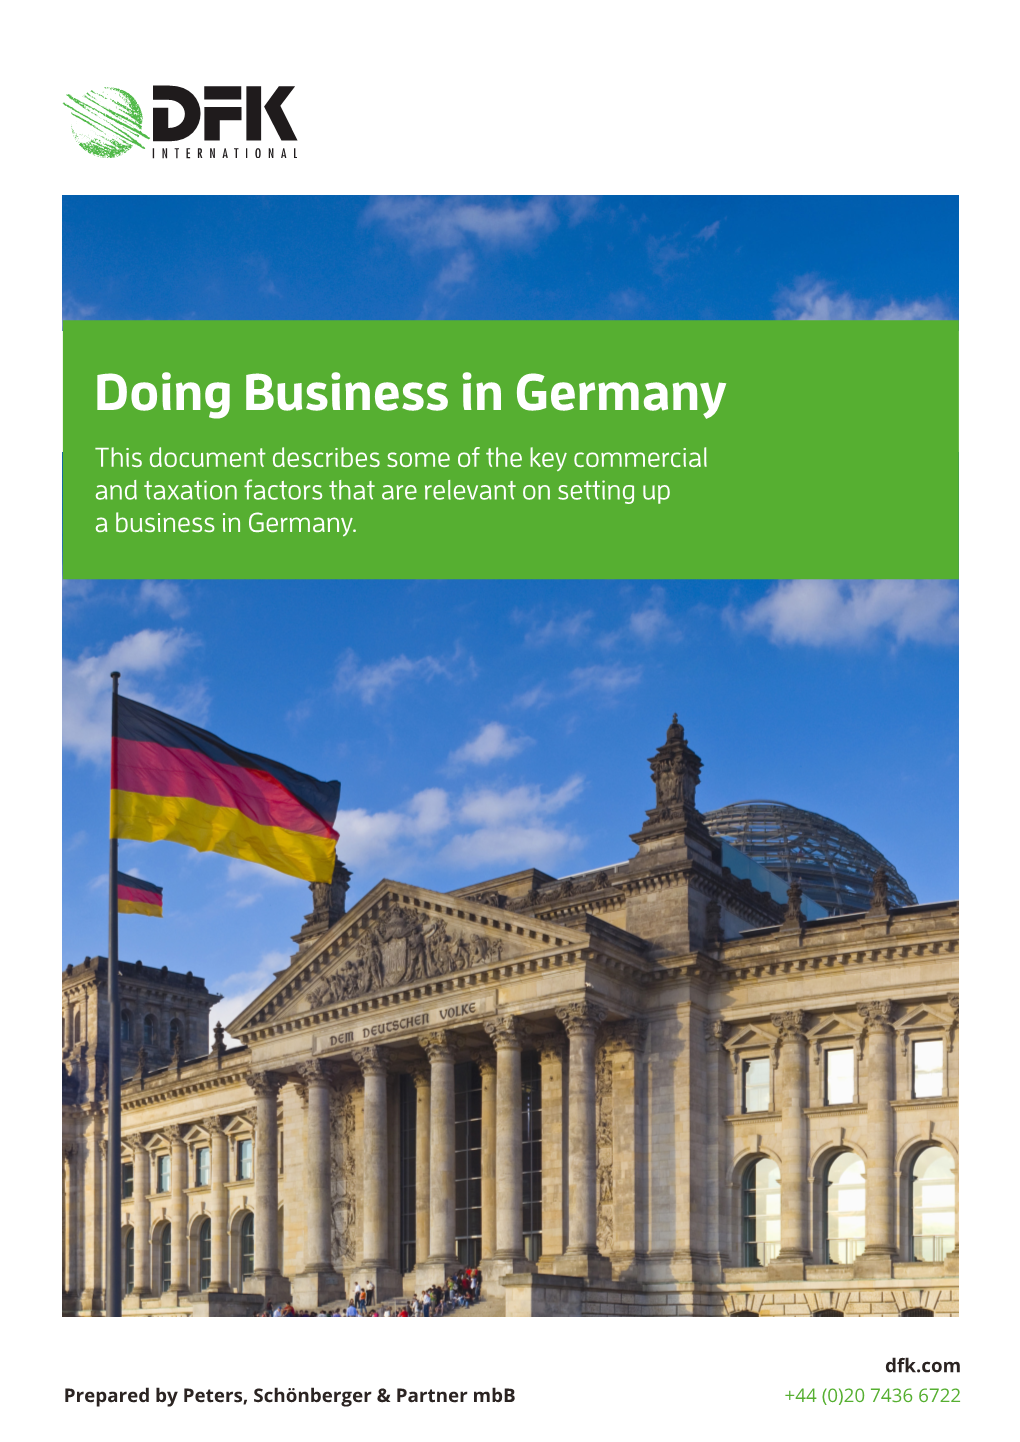 DFK Doing Business in Germany 2018.Pdf